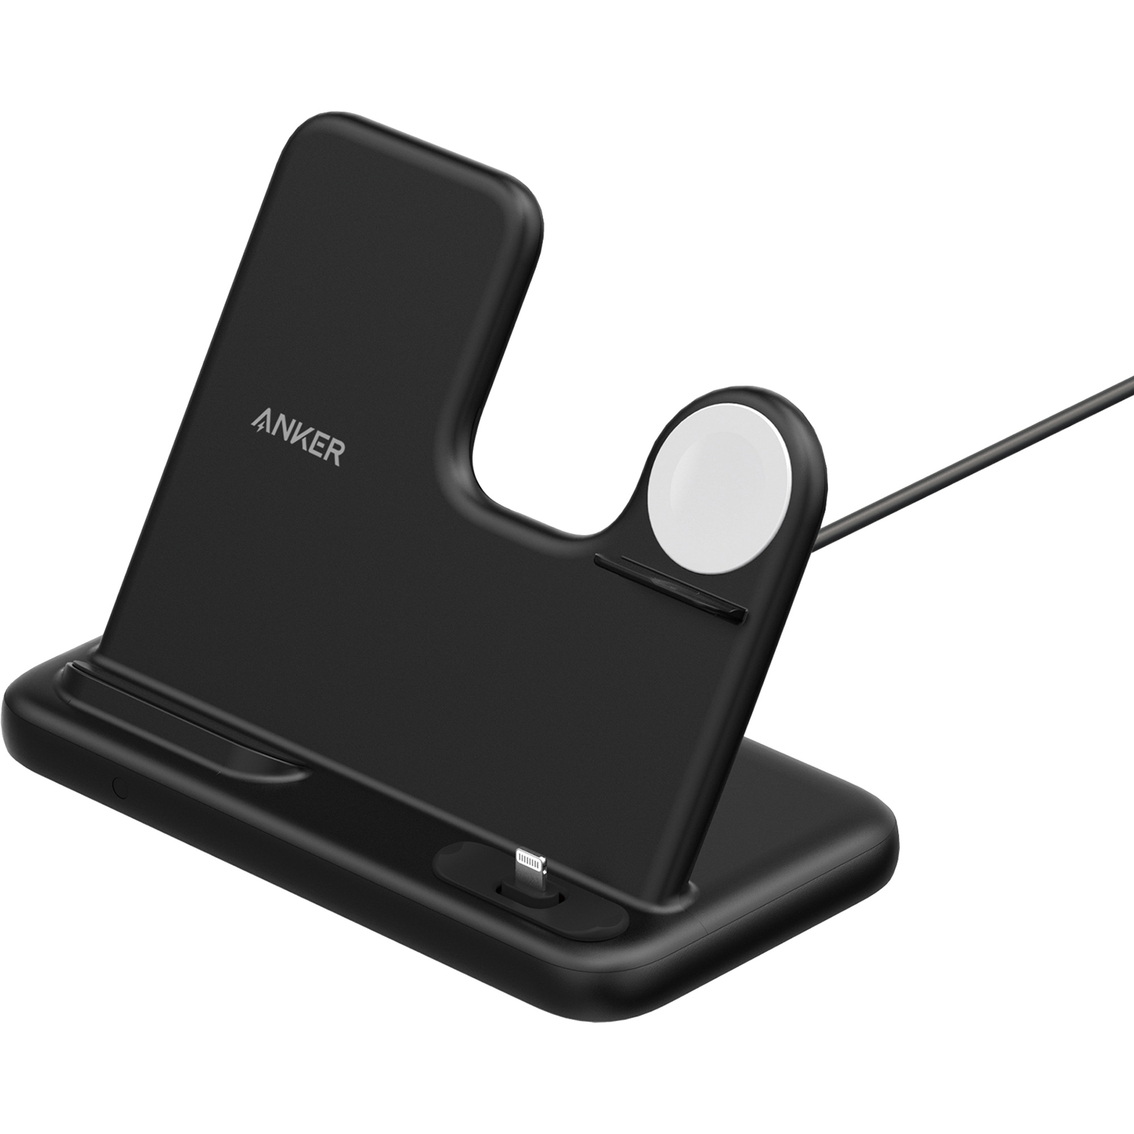 Anker PowerWave 4 in 1 Stand - Image 2 of 5